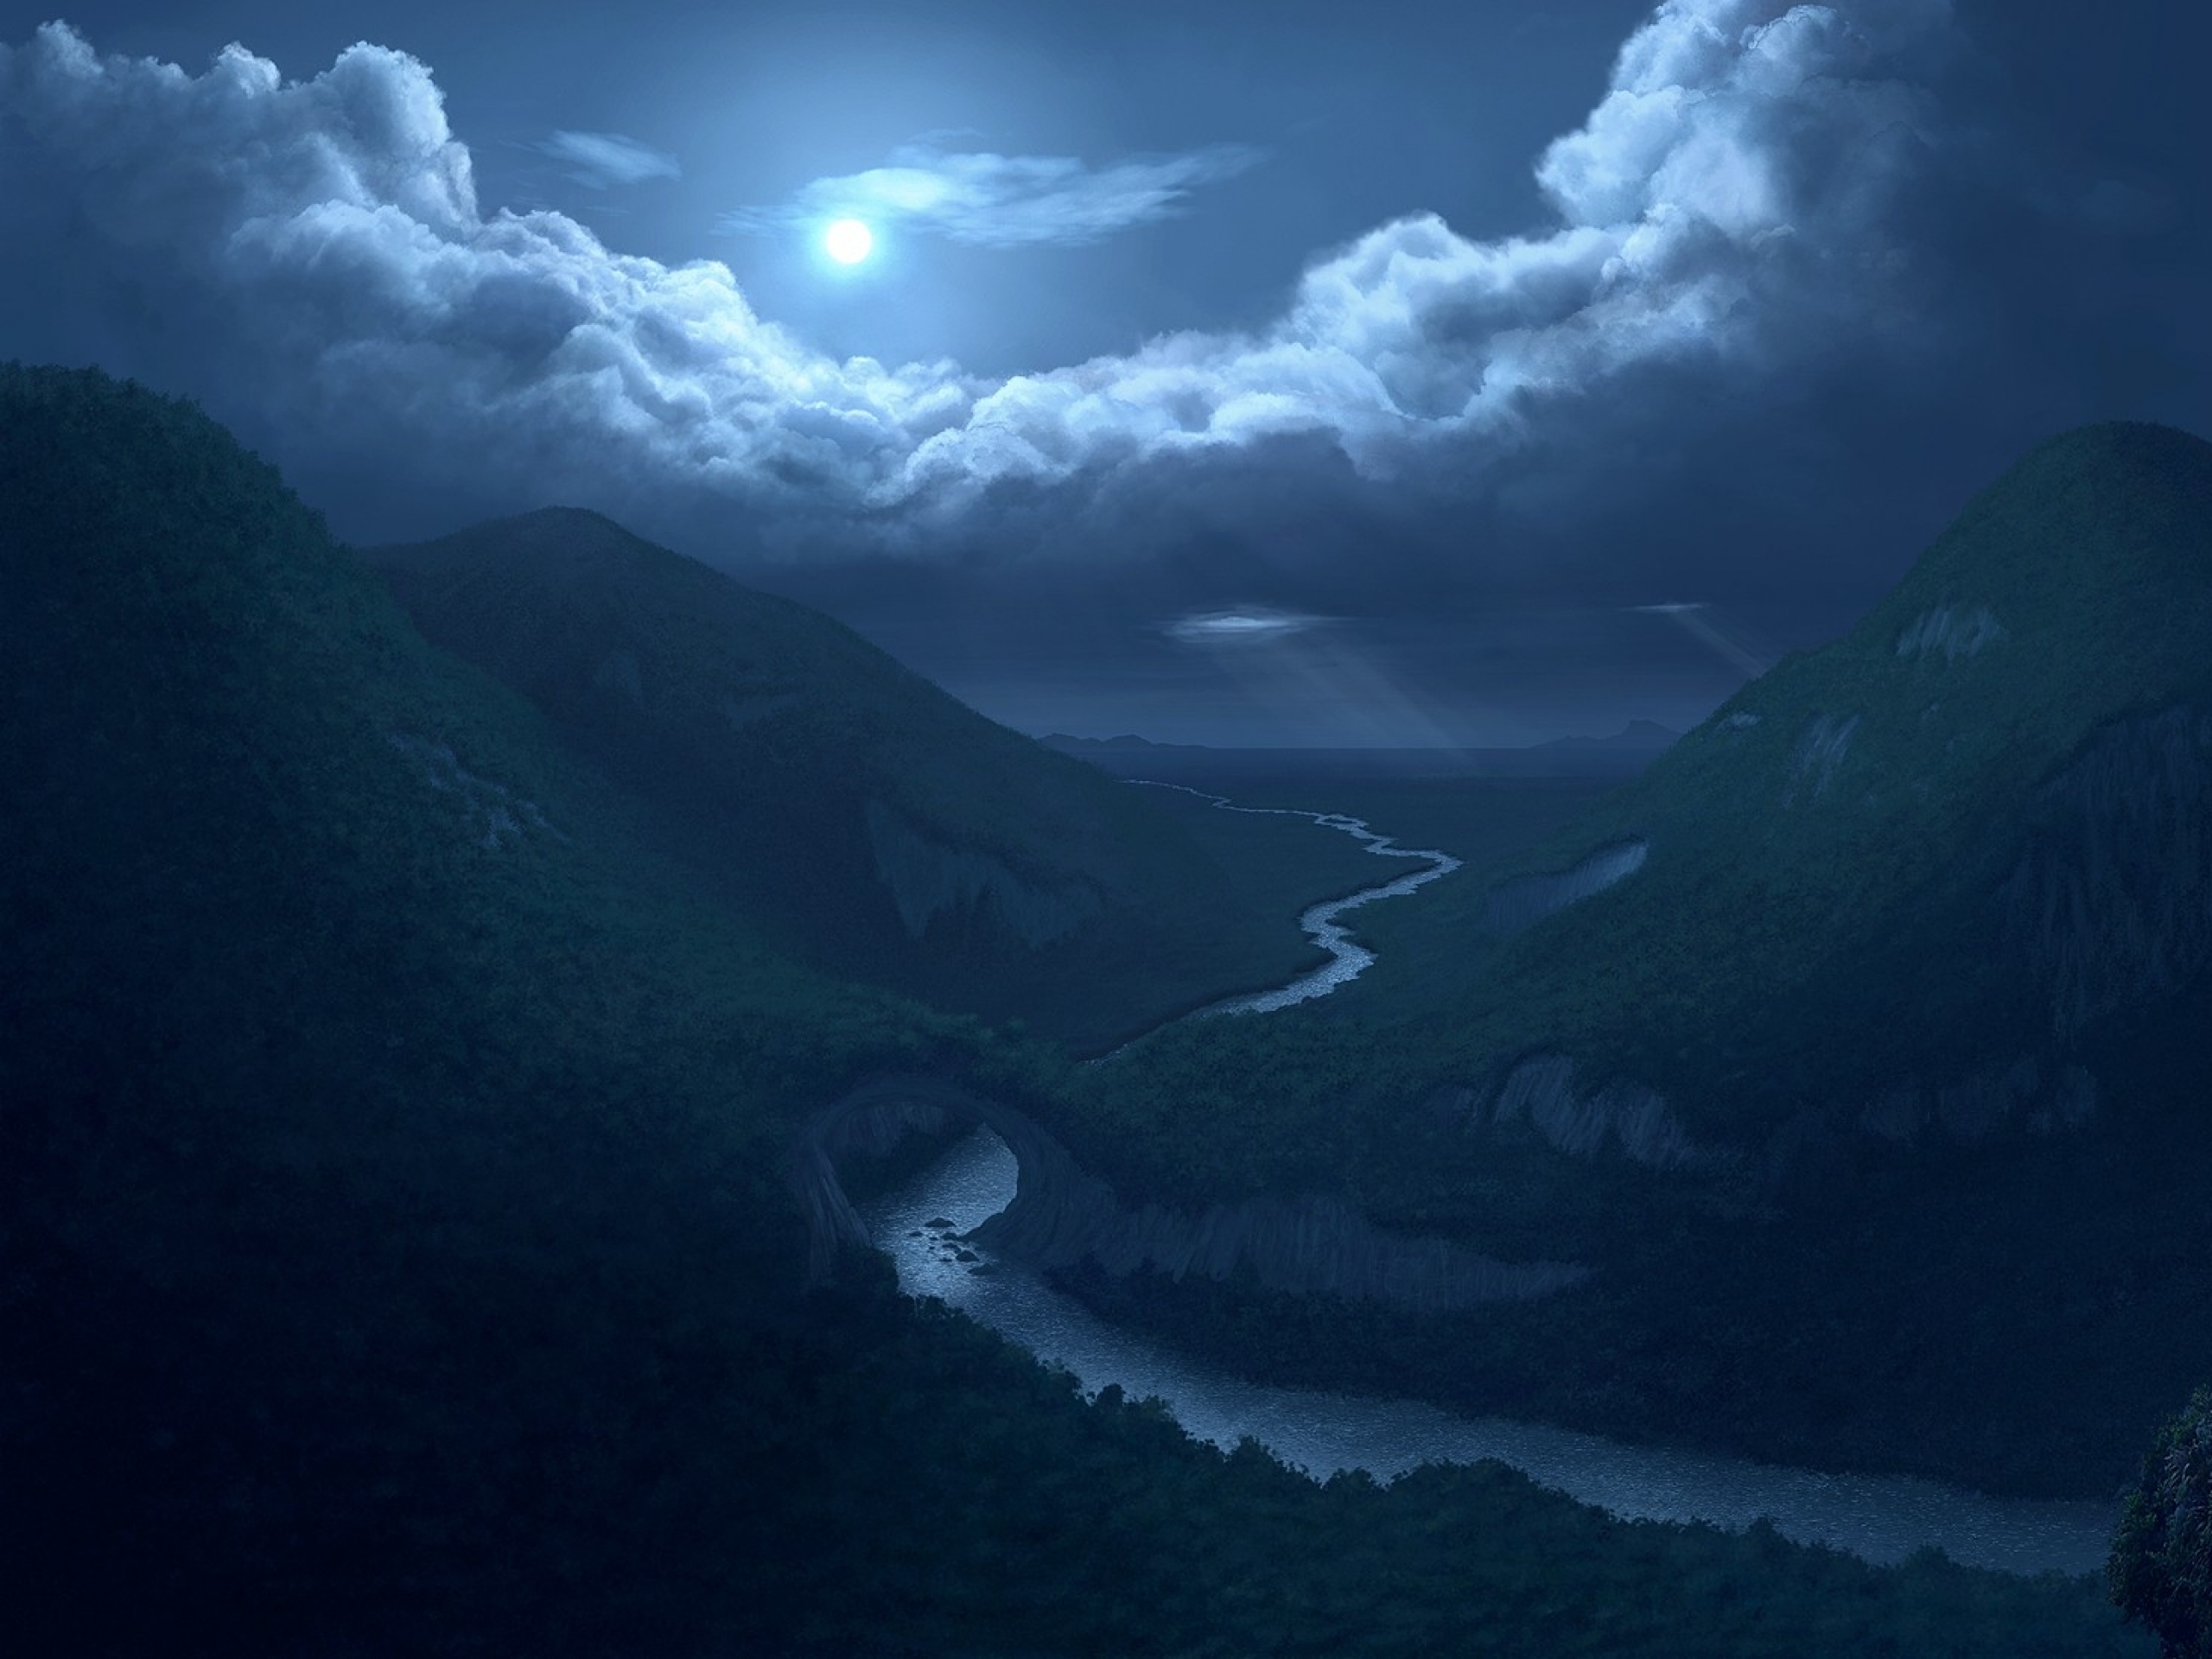 Moon Clouds Mountains & River wallpaper. Moon Clouds Mountains & River